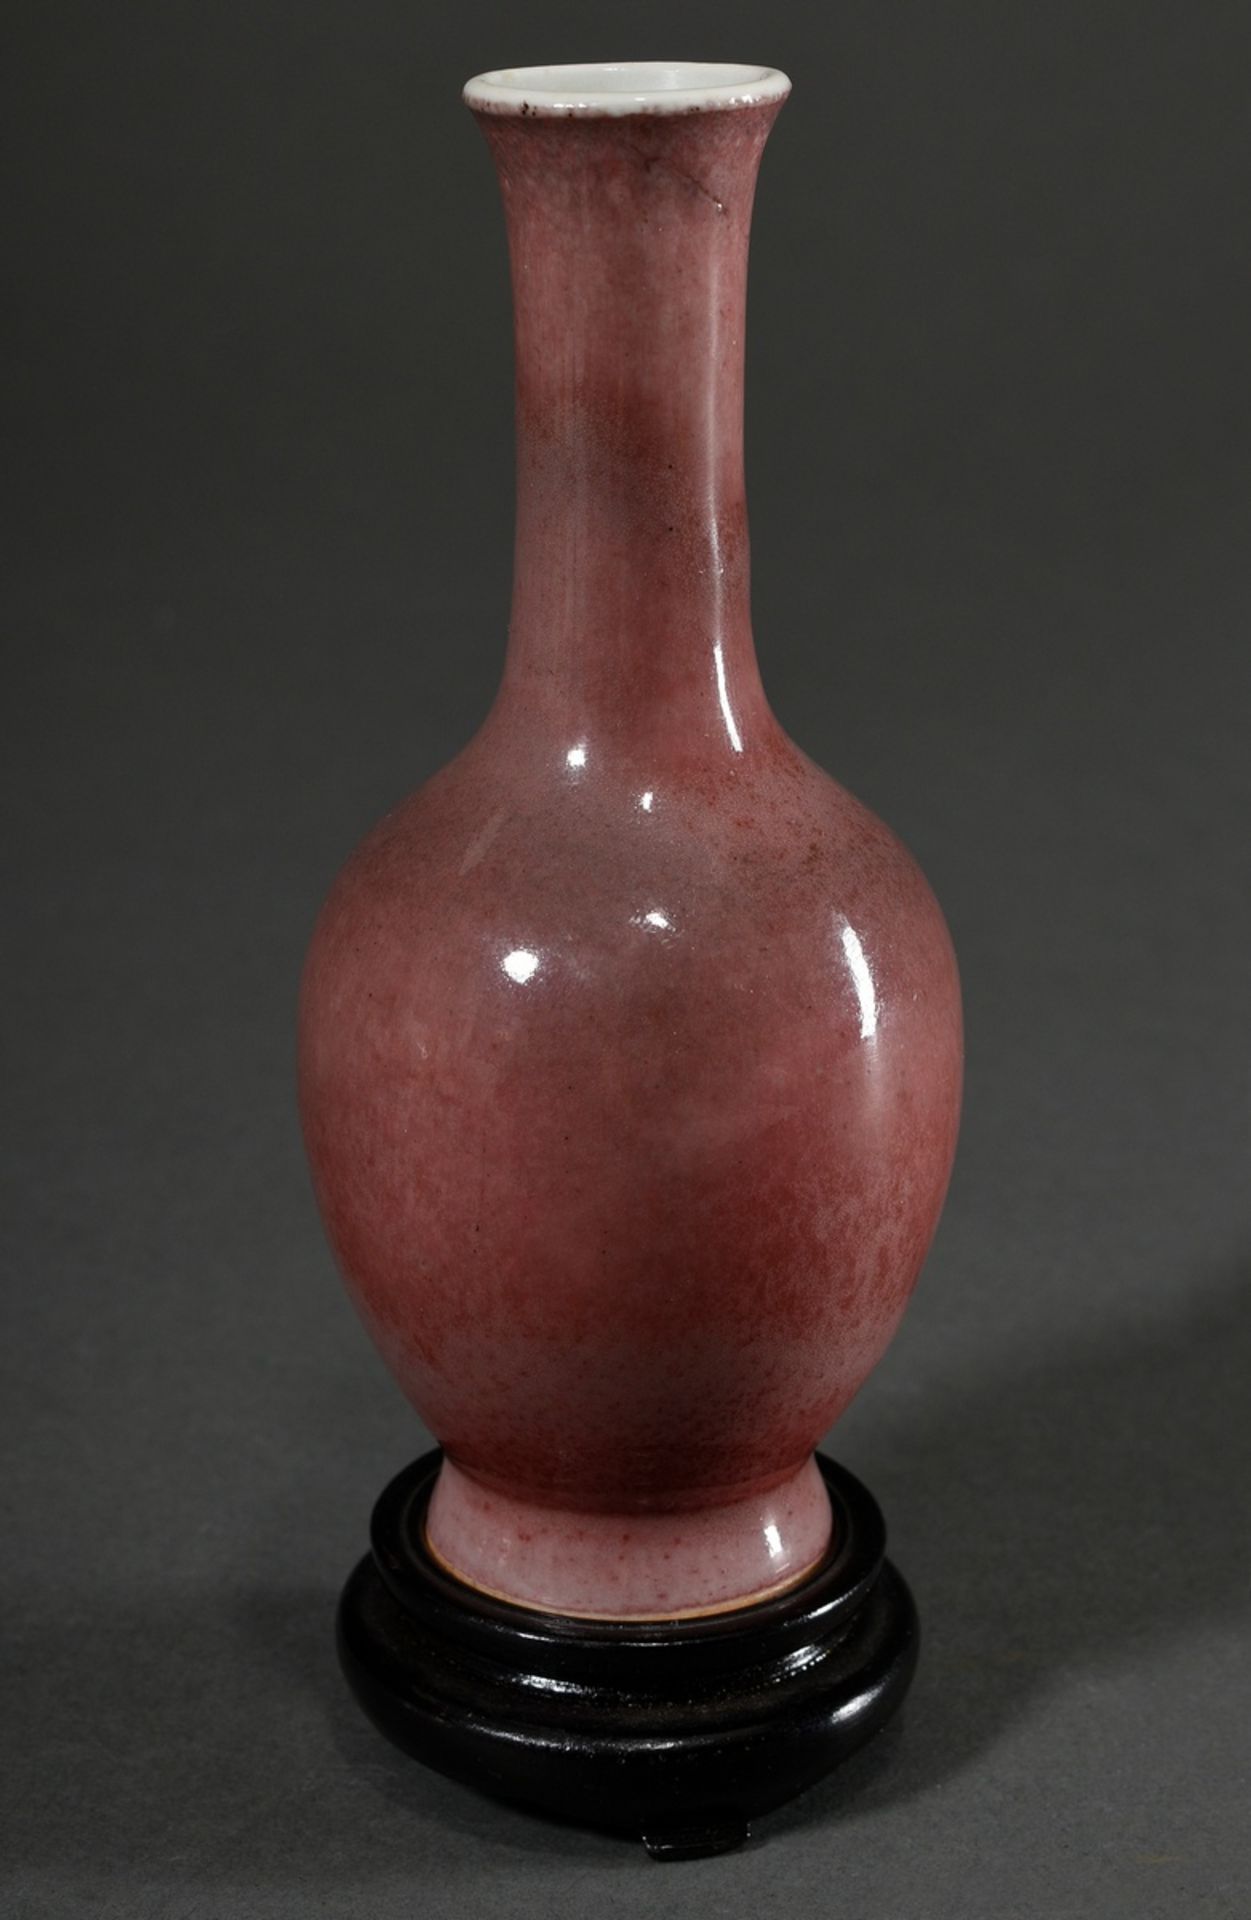 Small porcelain bottle vase with peach blossom glaze, China Qing dynasty, 6-character Kangxi mark, 